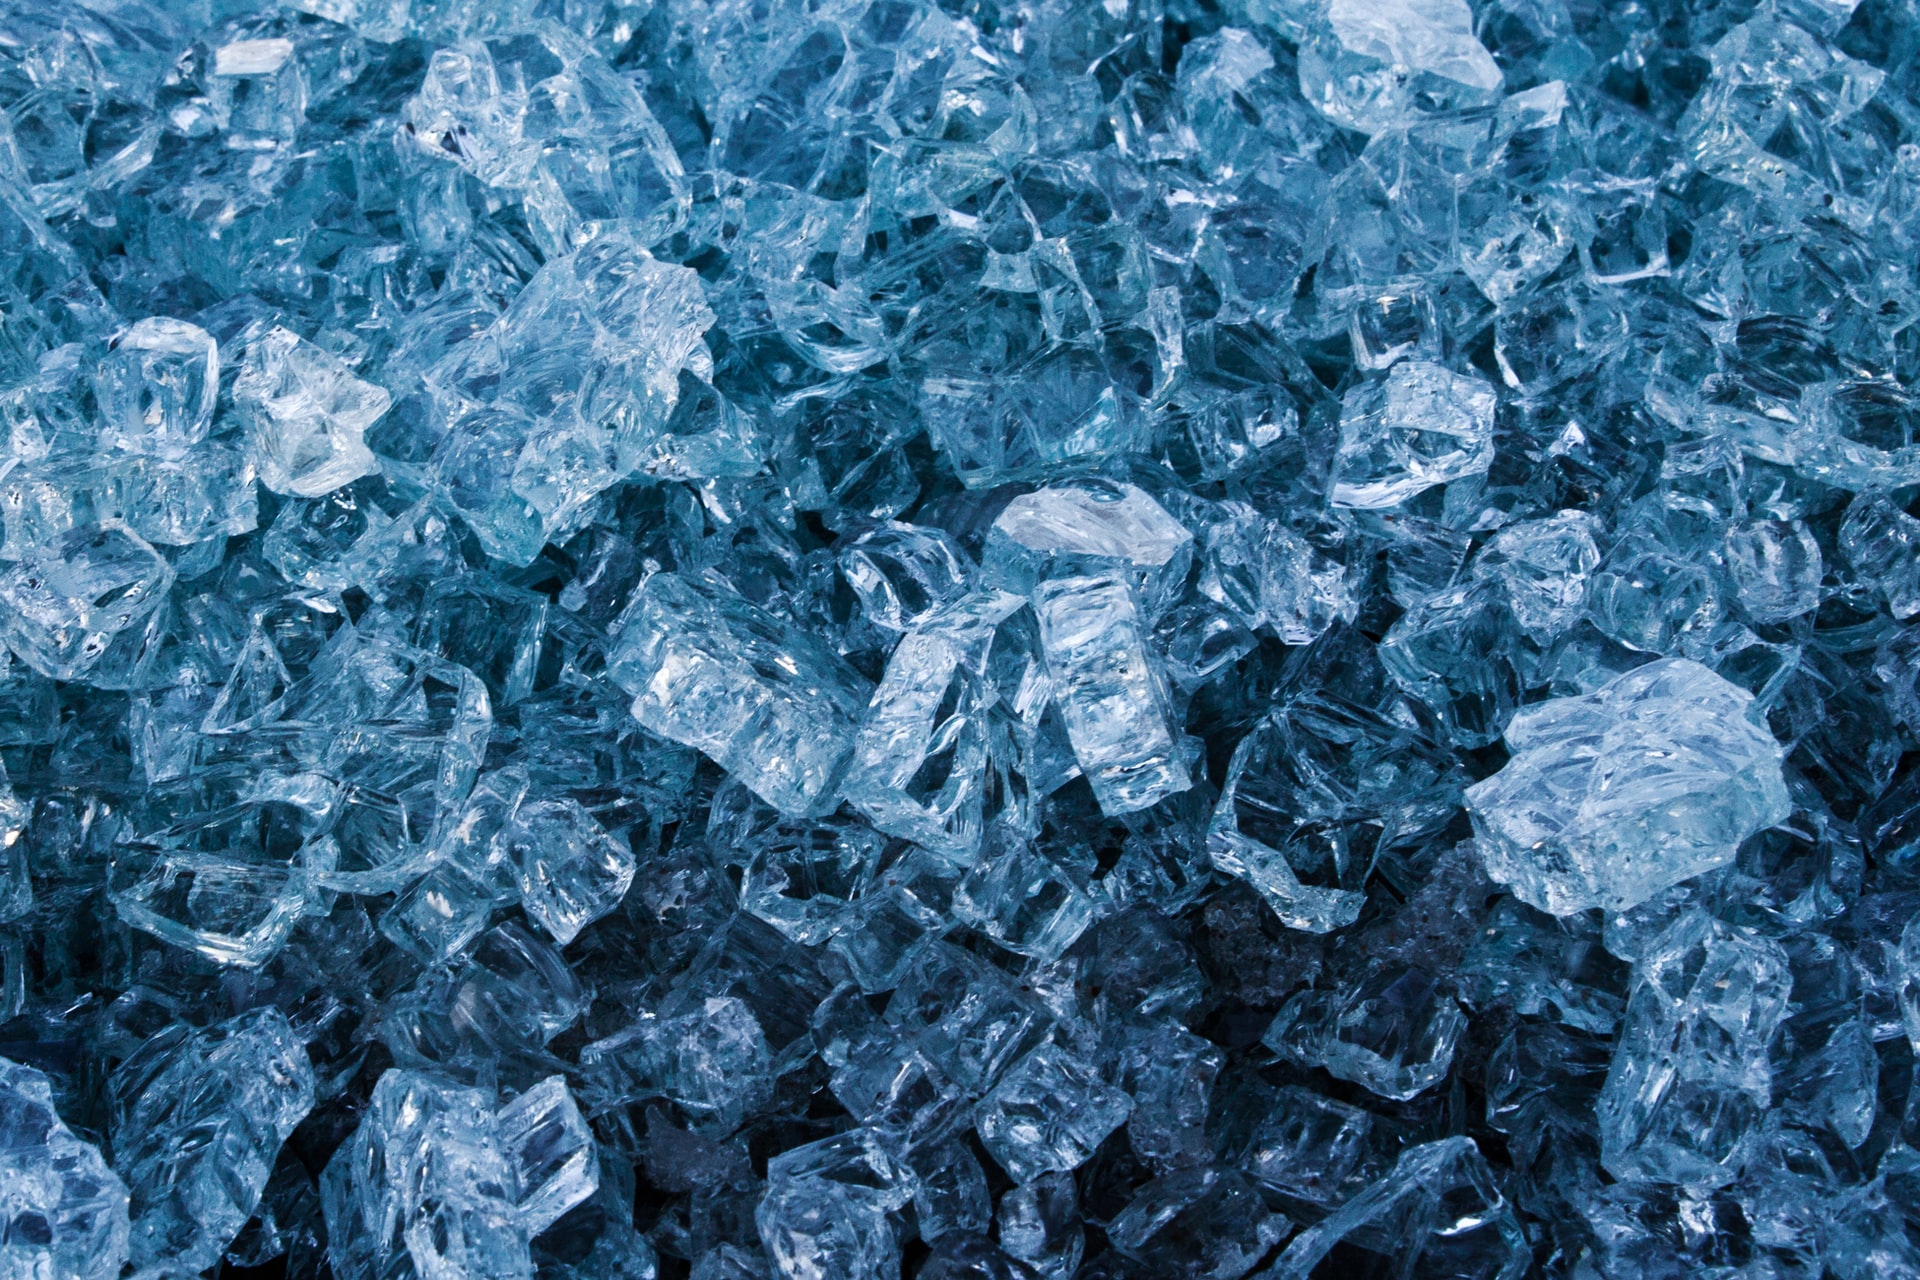 Glass is made up of silicon dioxide, or silica, which is a major component of sand, and therefore it offers significant untapped potential to be recycled into other products.